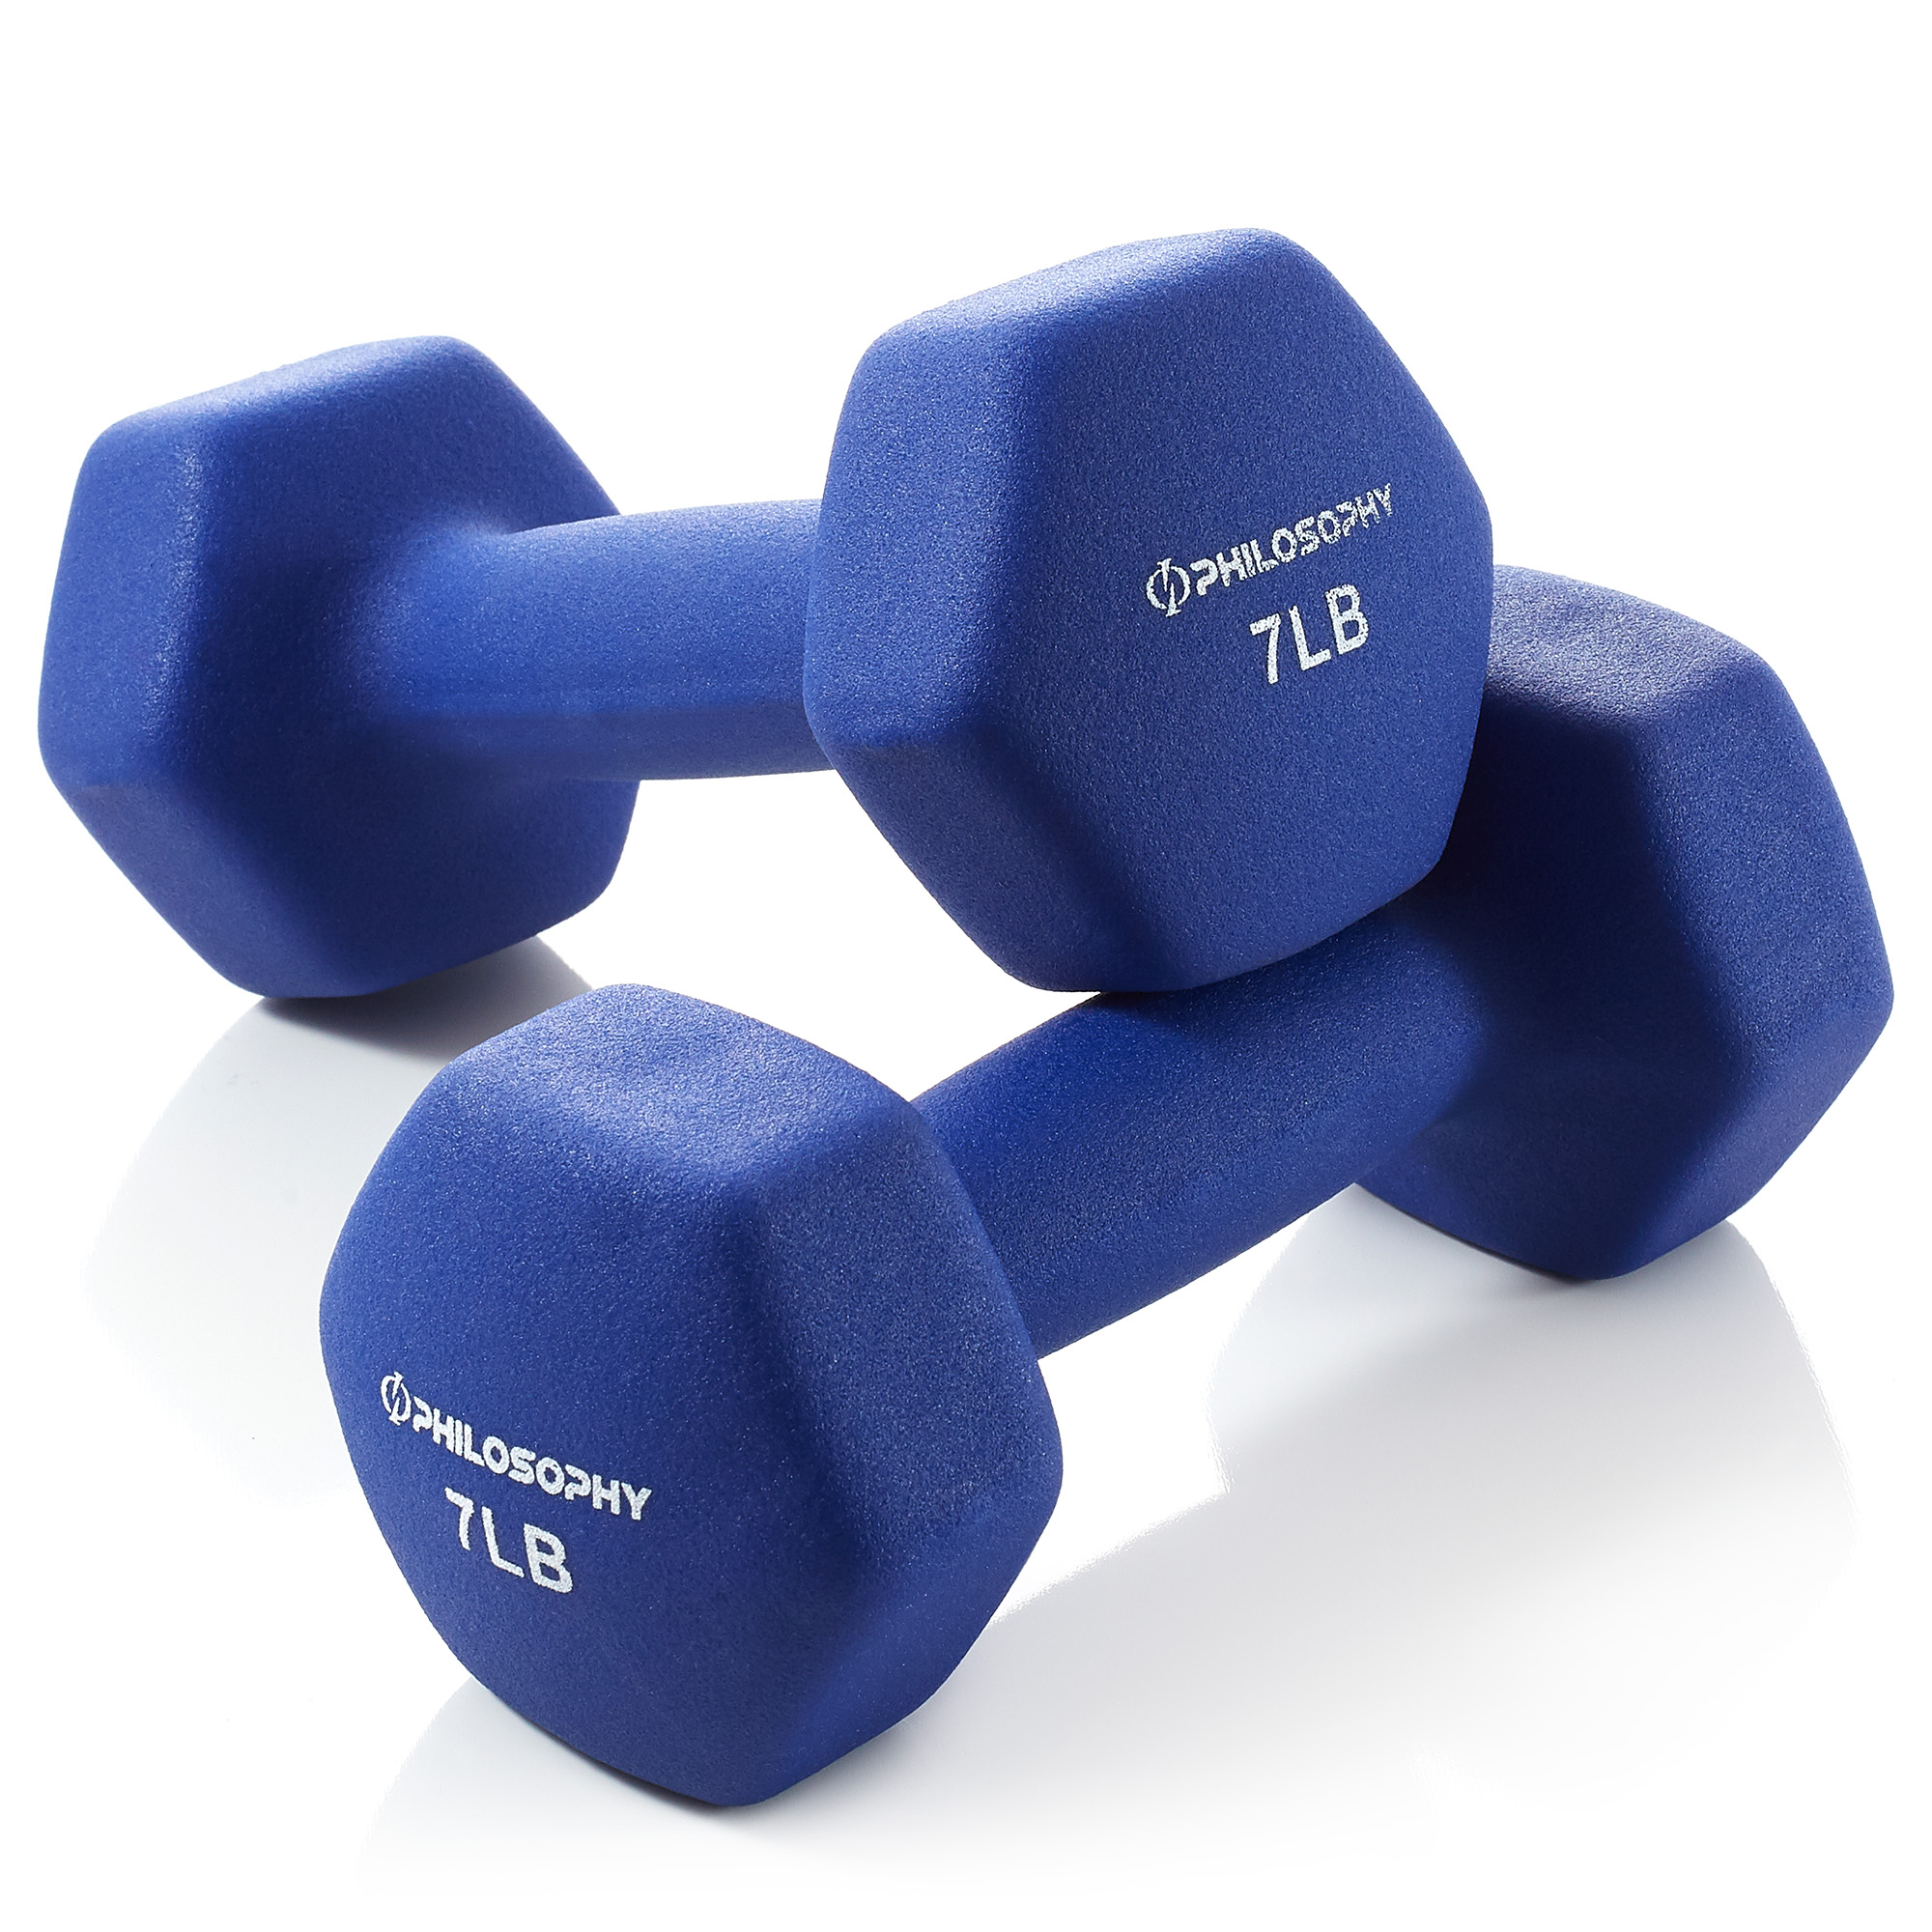 Philosophy Gym Neoprene Hex Dumbbell Hand Weights, Set of 2 - Workout Strength Training